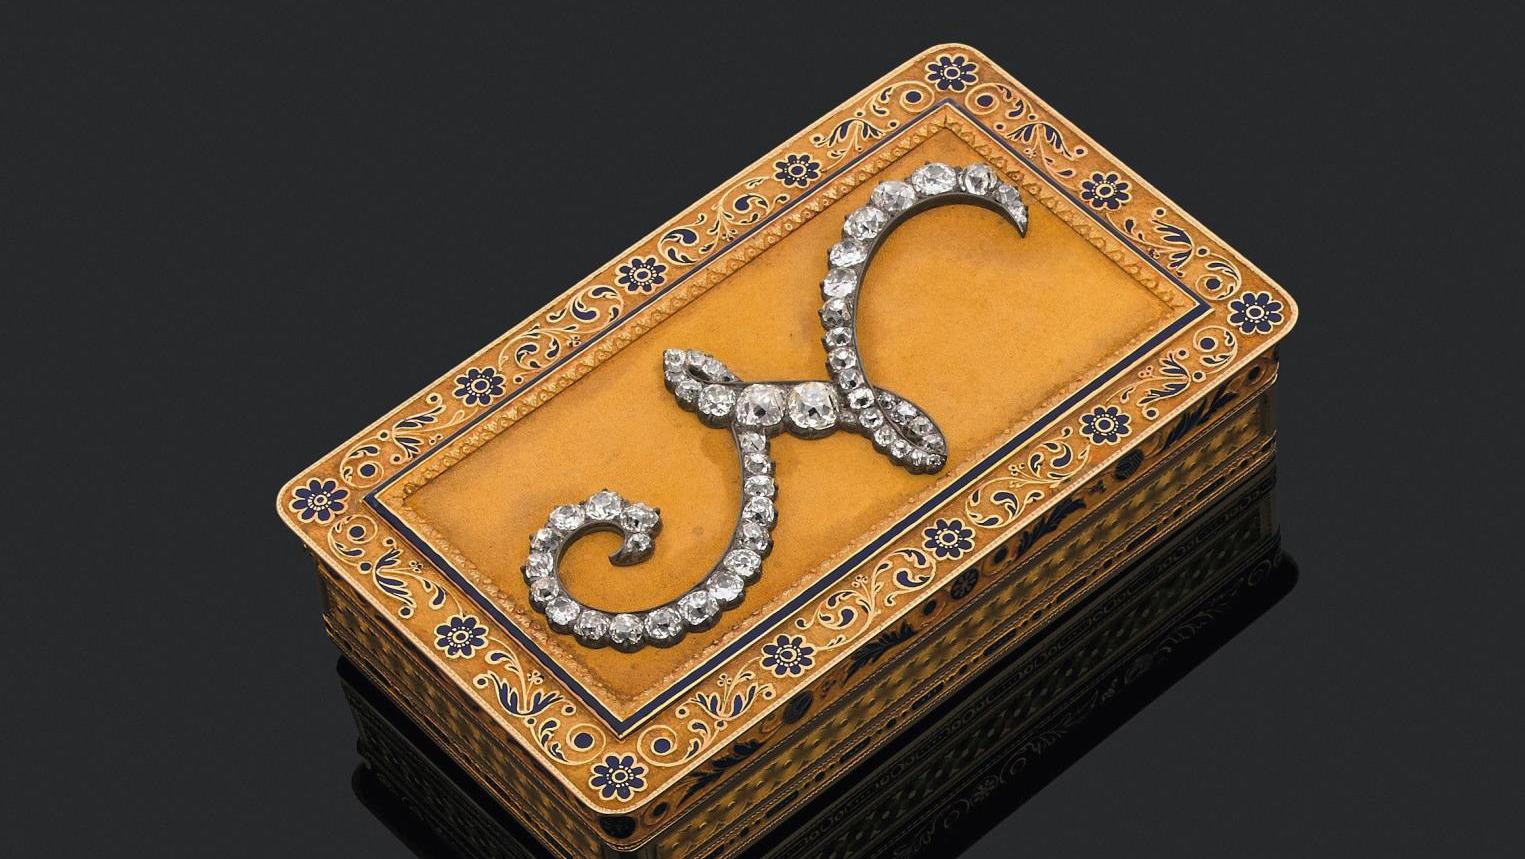 Moulinié Bautte & Cie. Gift snuffbox in yellow-gold guilloché, the lid decorated... Diplomatic Gifts Signed with 